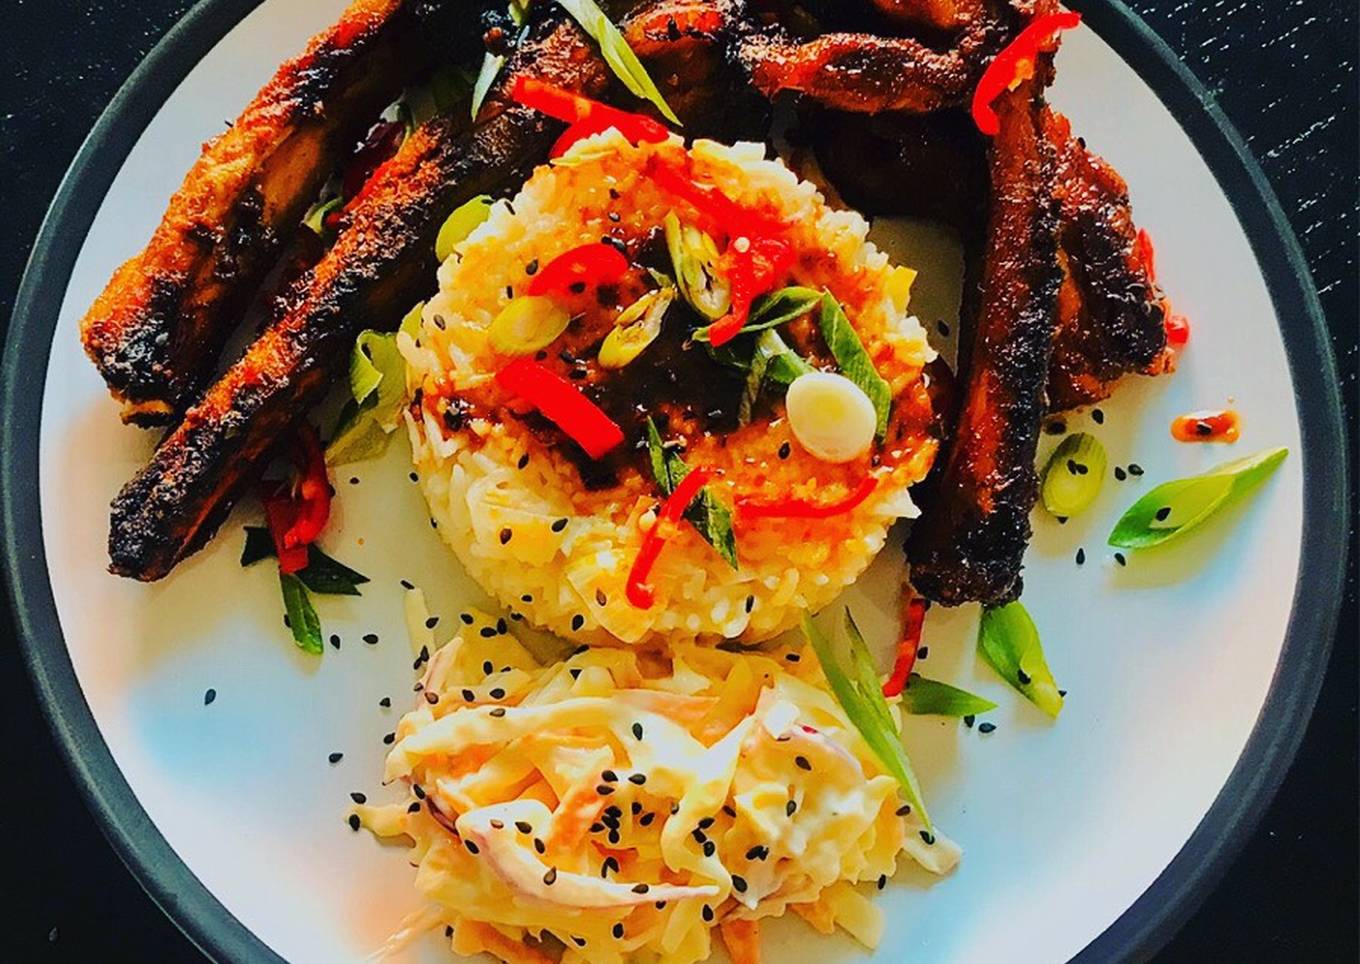 Lime and chilli rice with sticky spicy pork ribs and homemade coleslaw